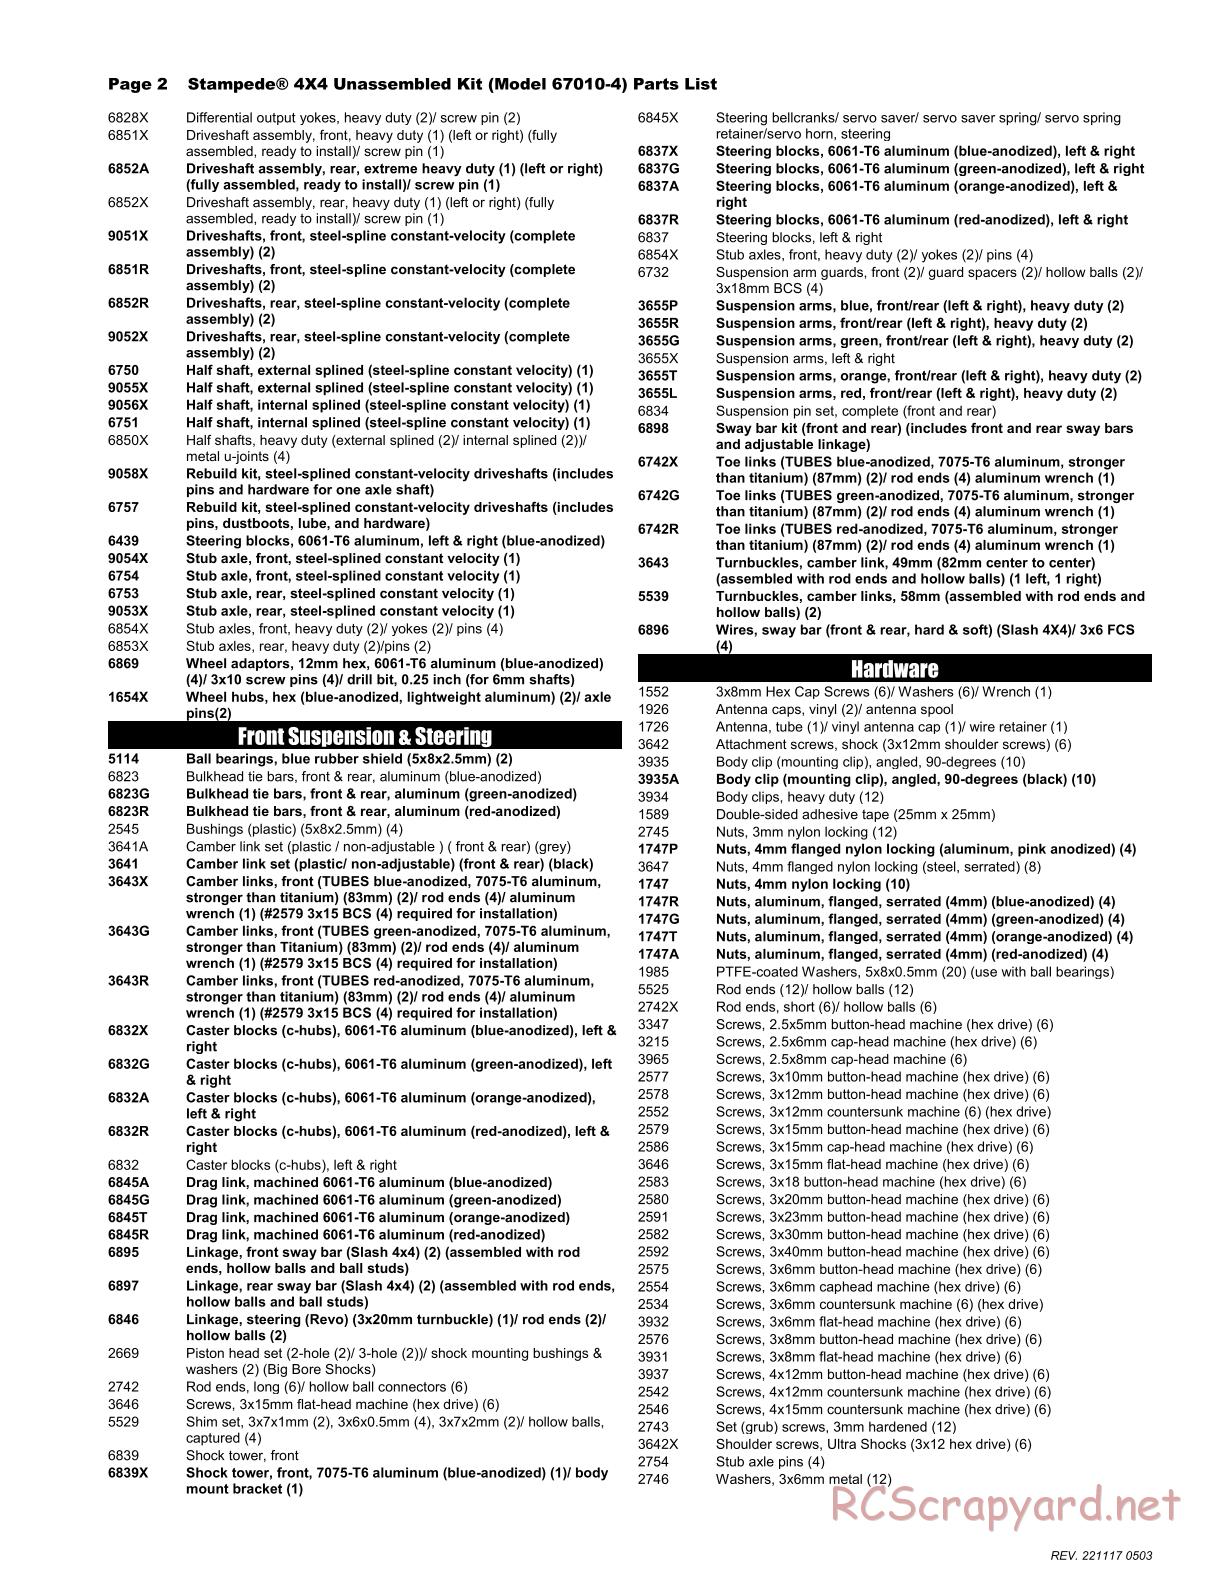 Traxxas - Stampede 4x4 (2019) - Parts List - Page 2